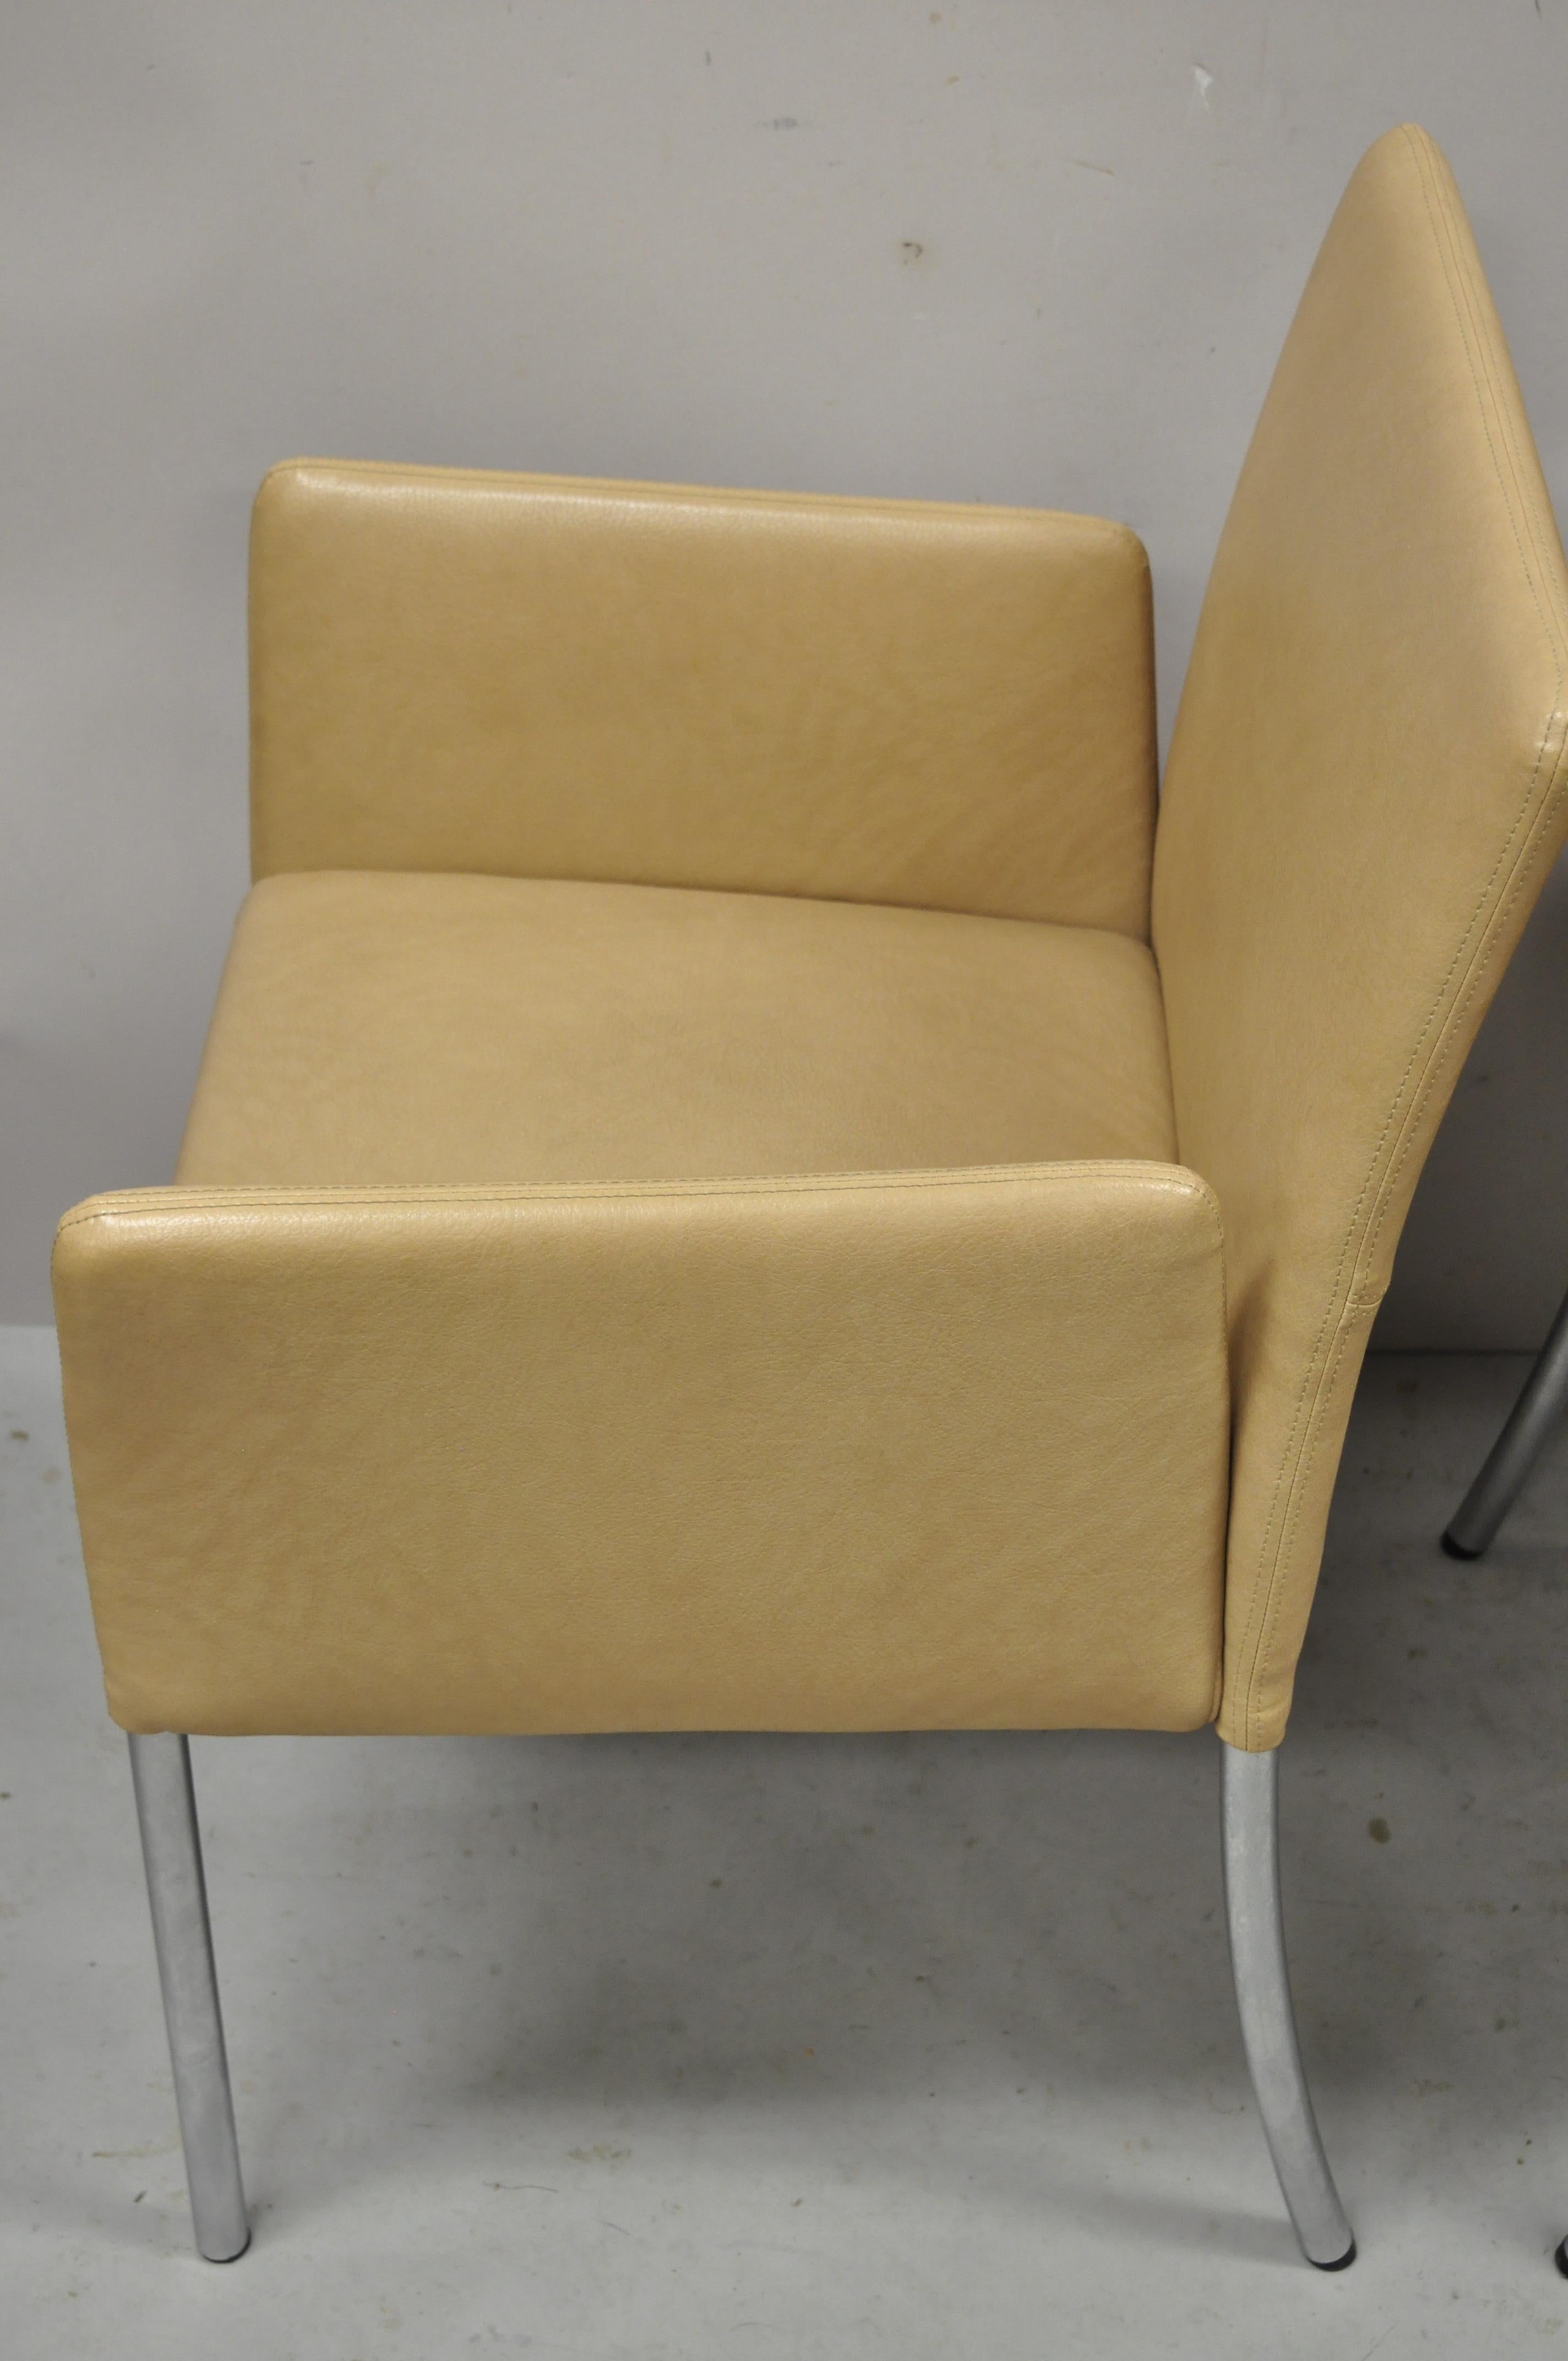 Coalesce Steelcase Beige Leather Model 1510 Switch Guest Arm Chair 'A', a Pair For Sale 3